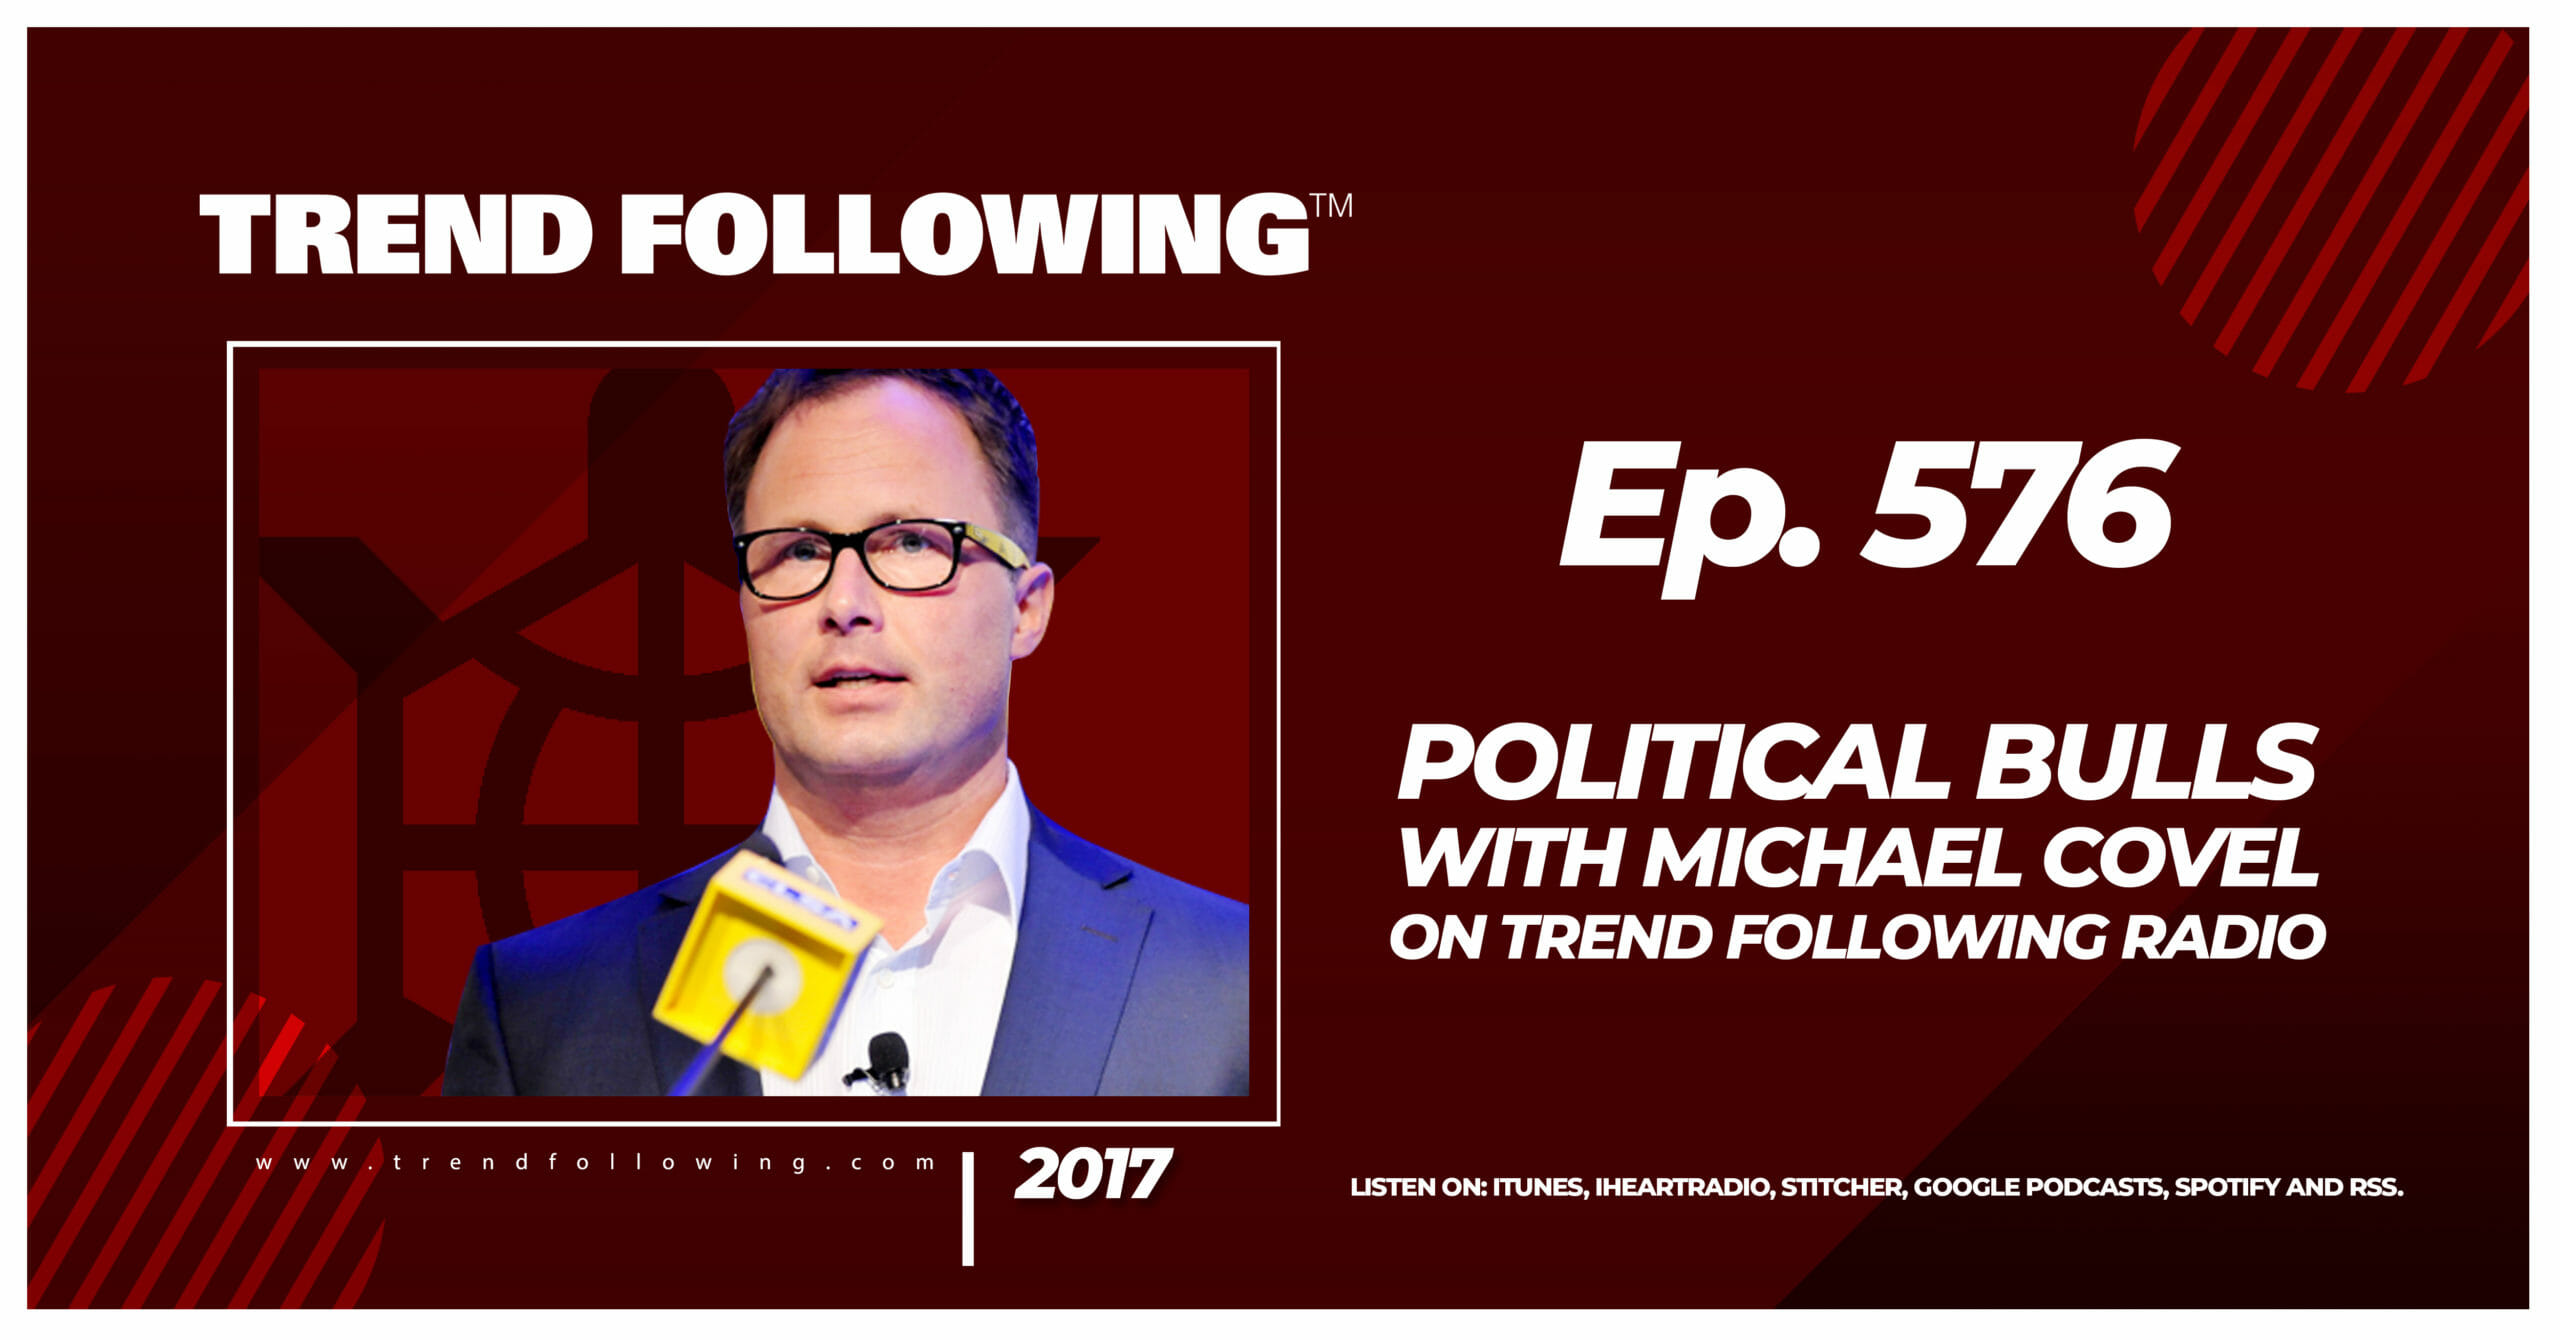 Political Bulls with Michael Covel on Trend Following Radio